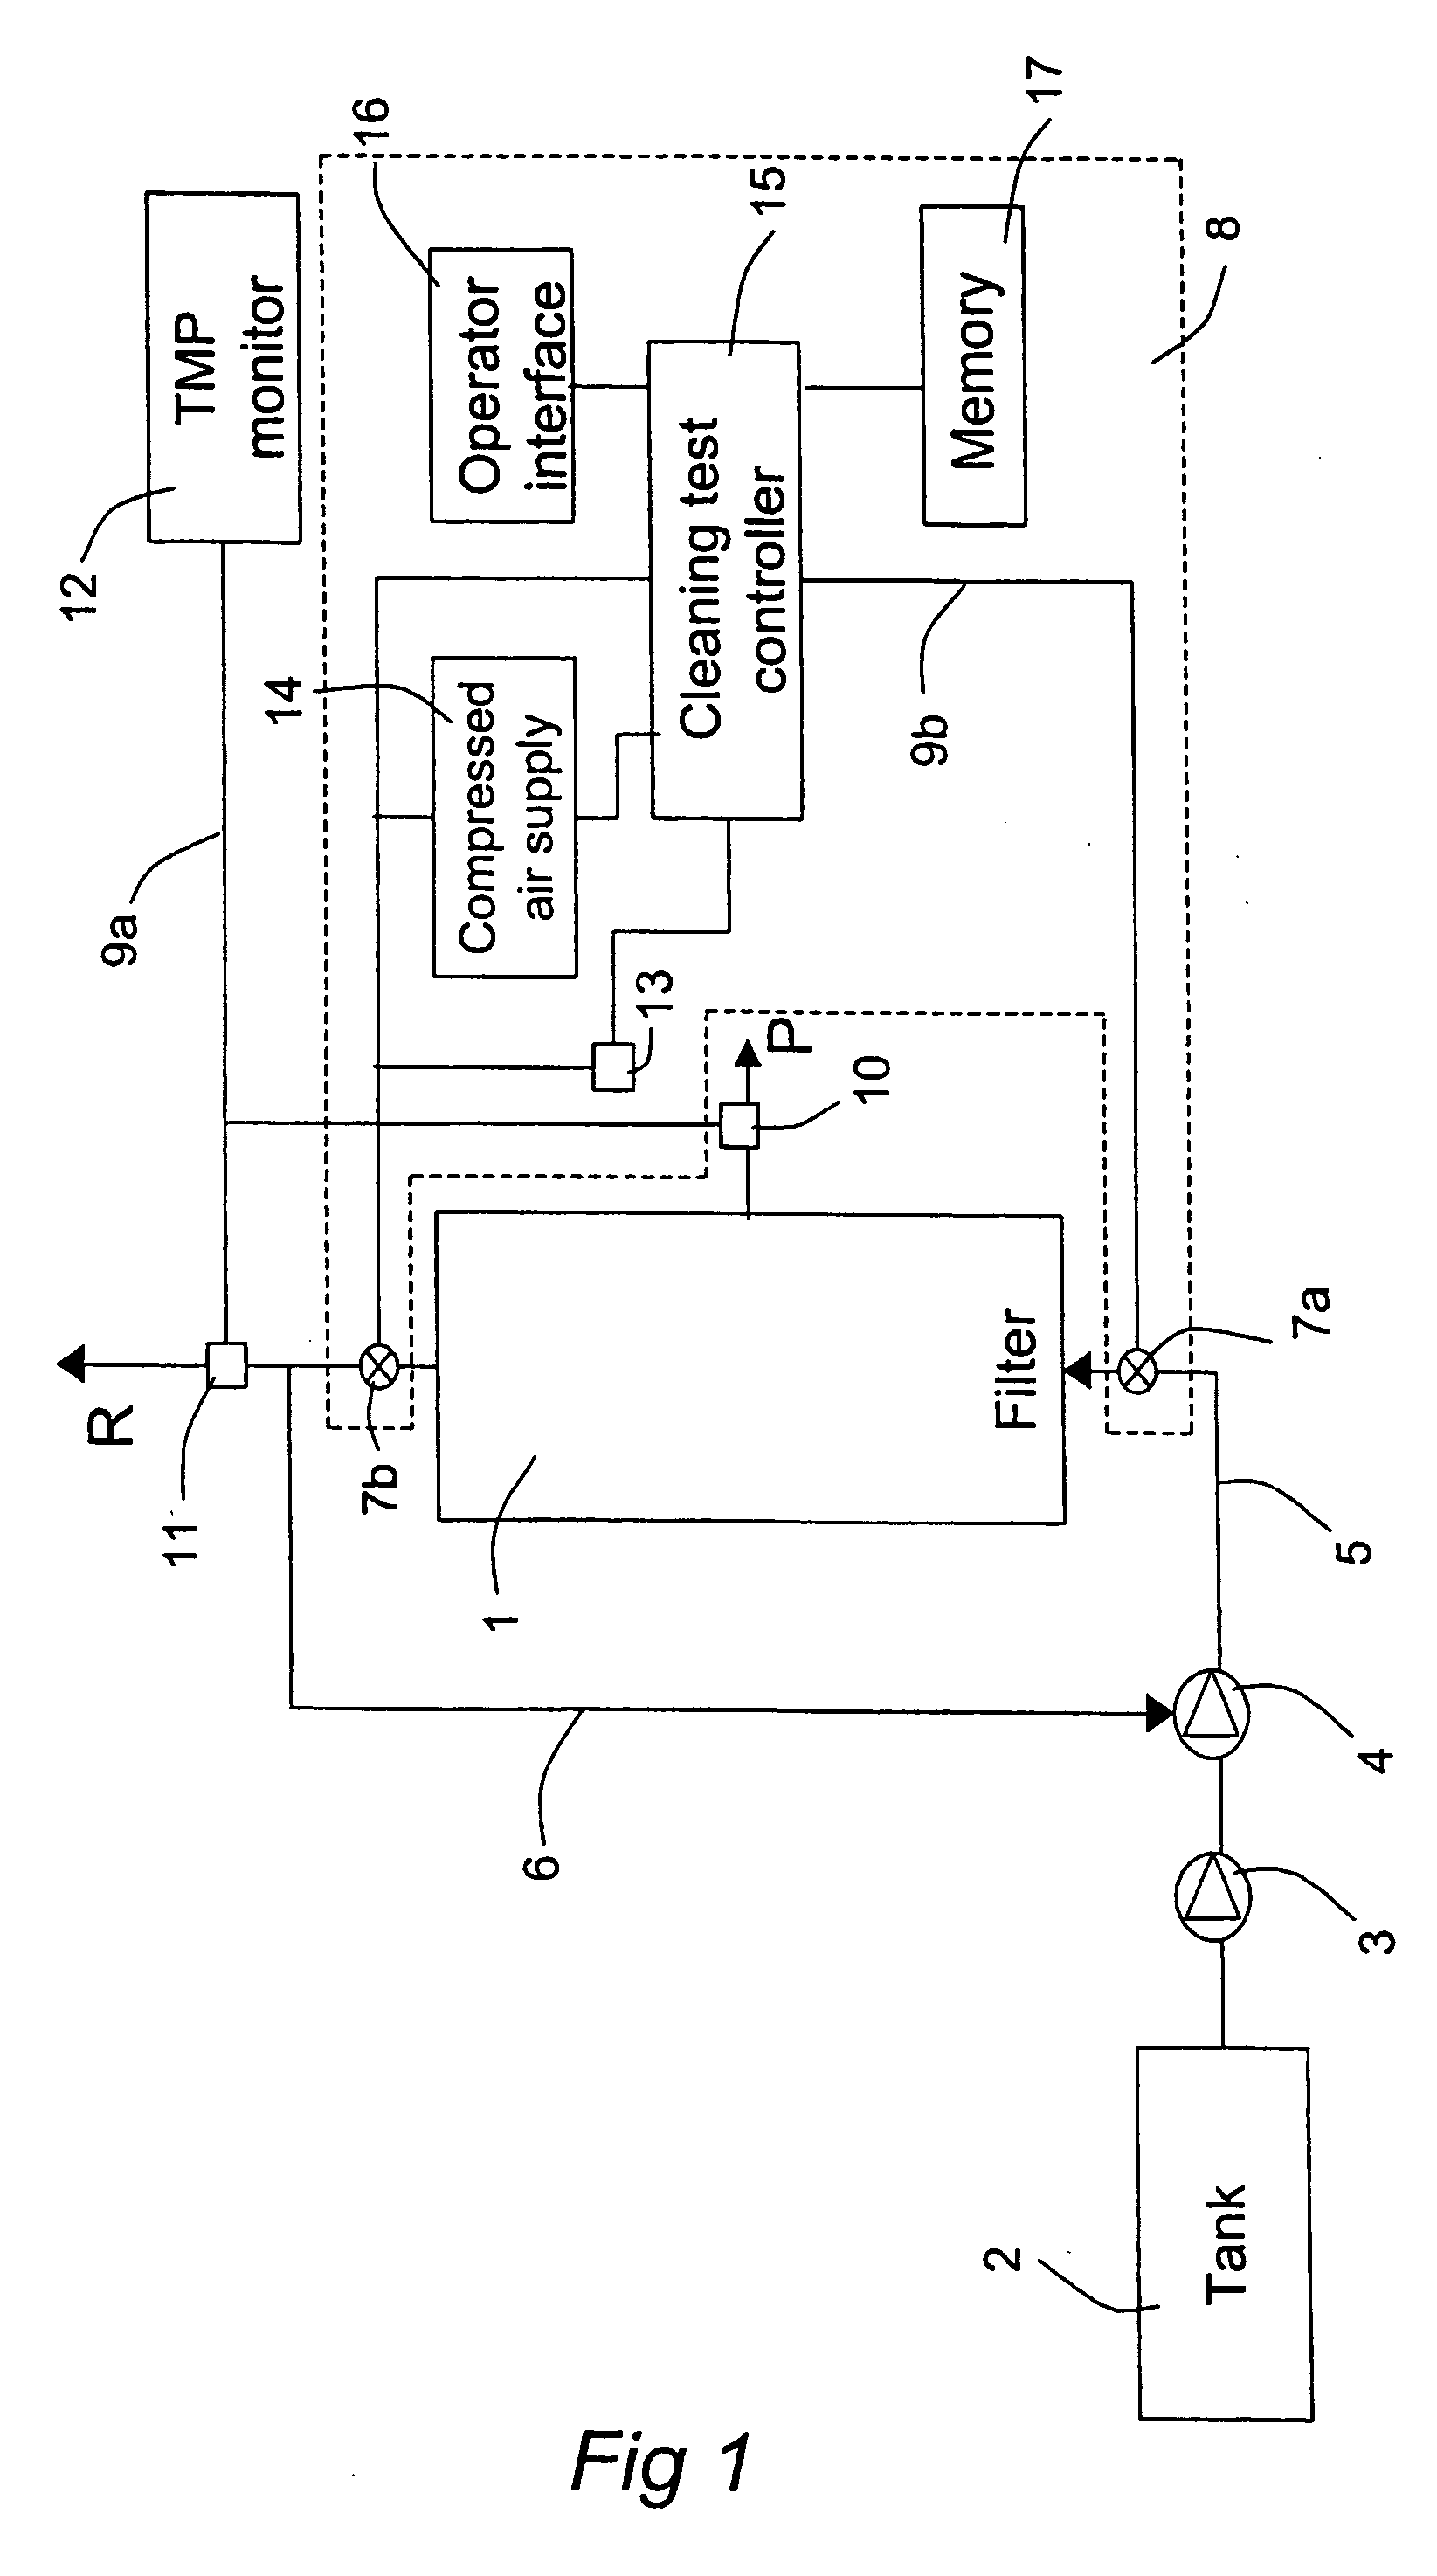 Cleaning efficiency testing method and apparatus for a filter in a filtering system